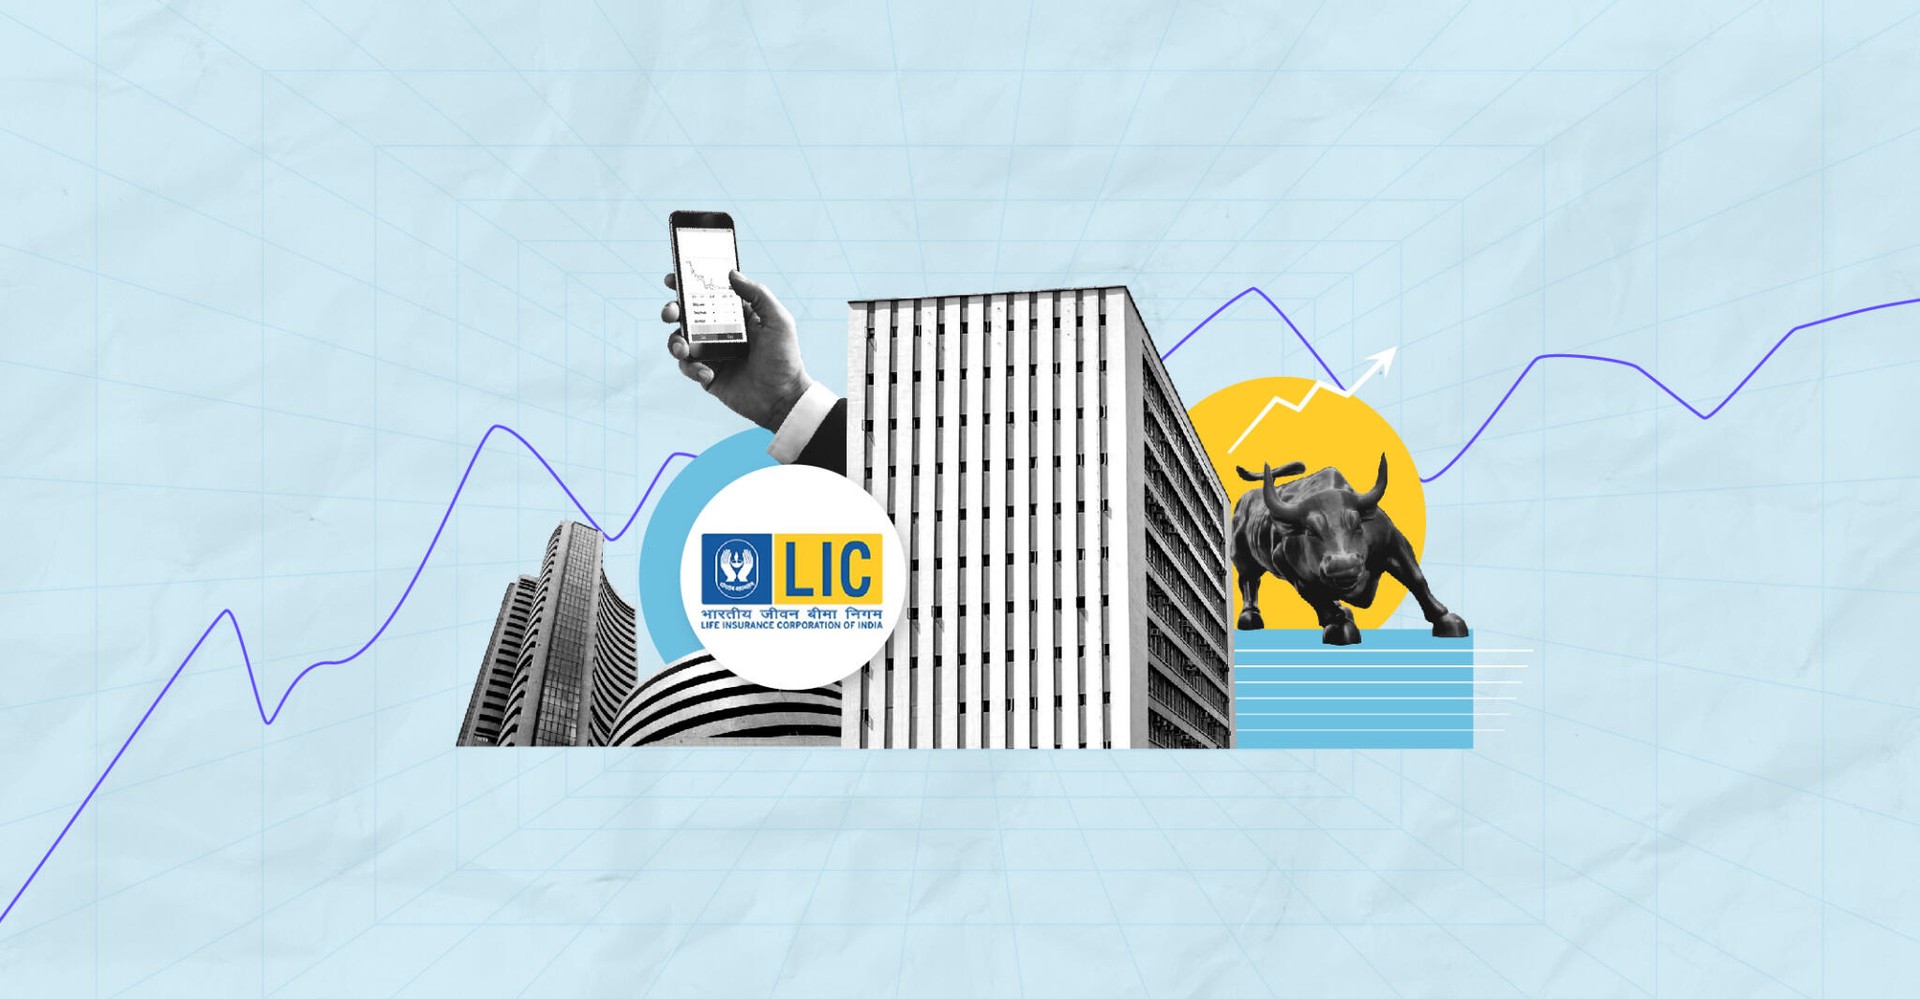 How to apply for LIC IPO?